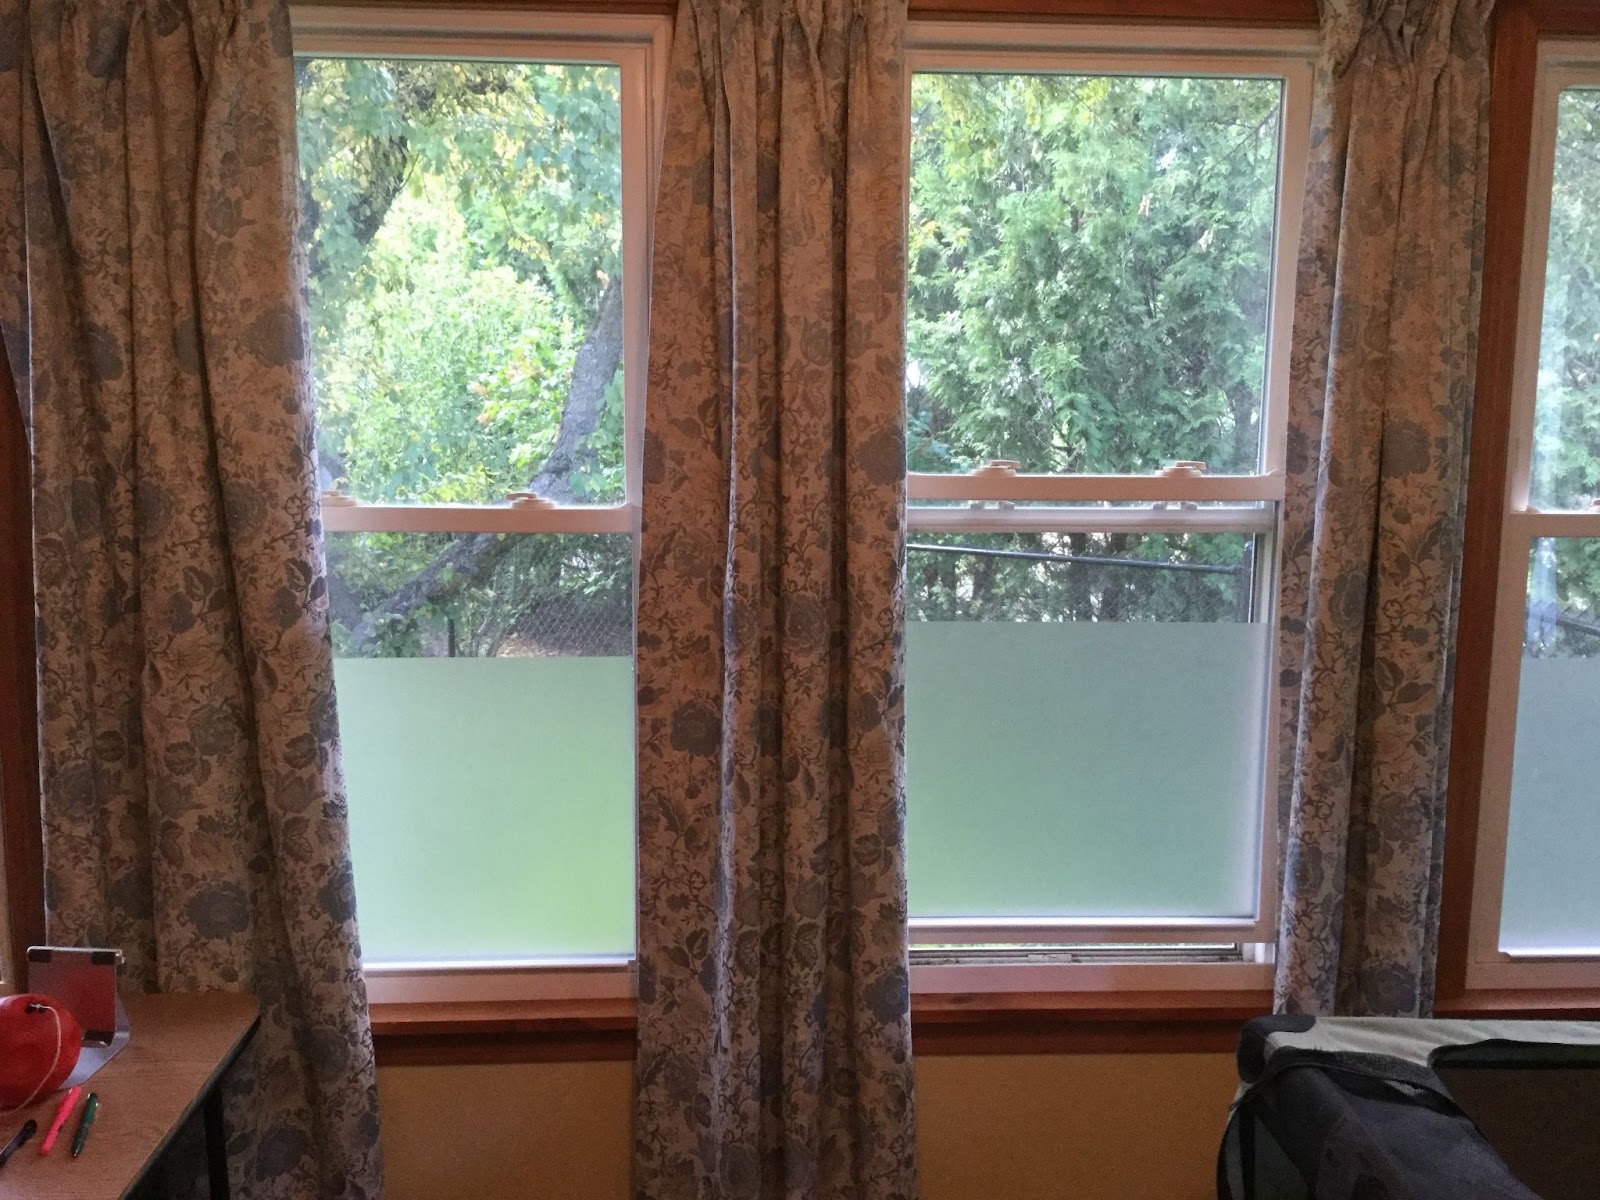 Two windows with full-length blue-and-white curtains pulled to the side. The bottom third of the window has translucent film covering it. The upper two-thirds of the windows show green leafy trees outside.